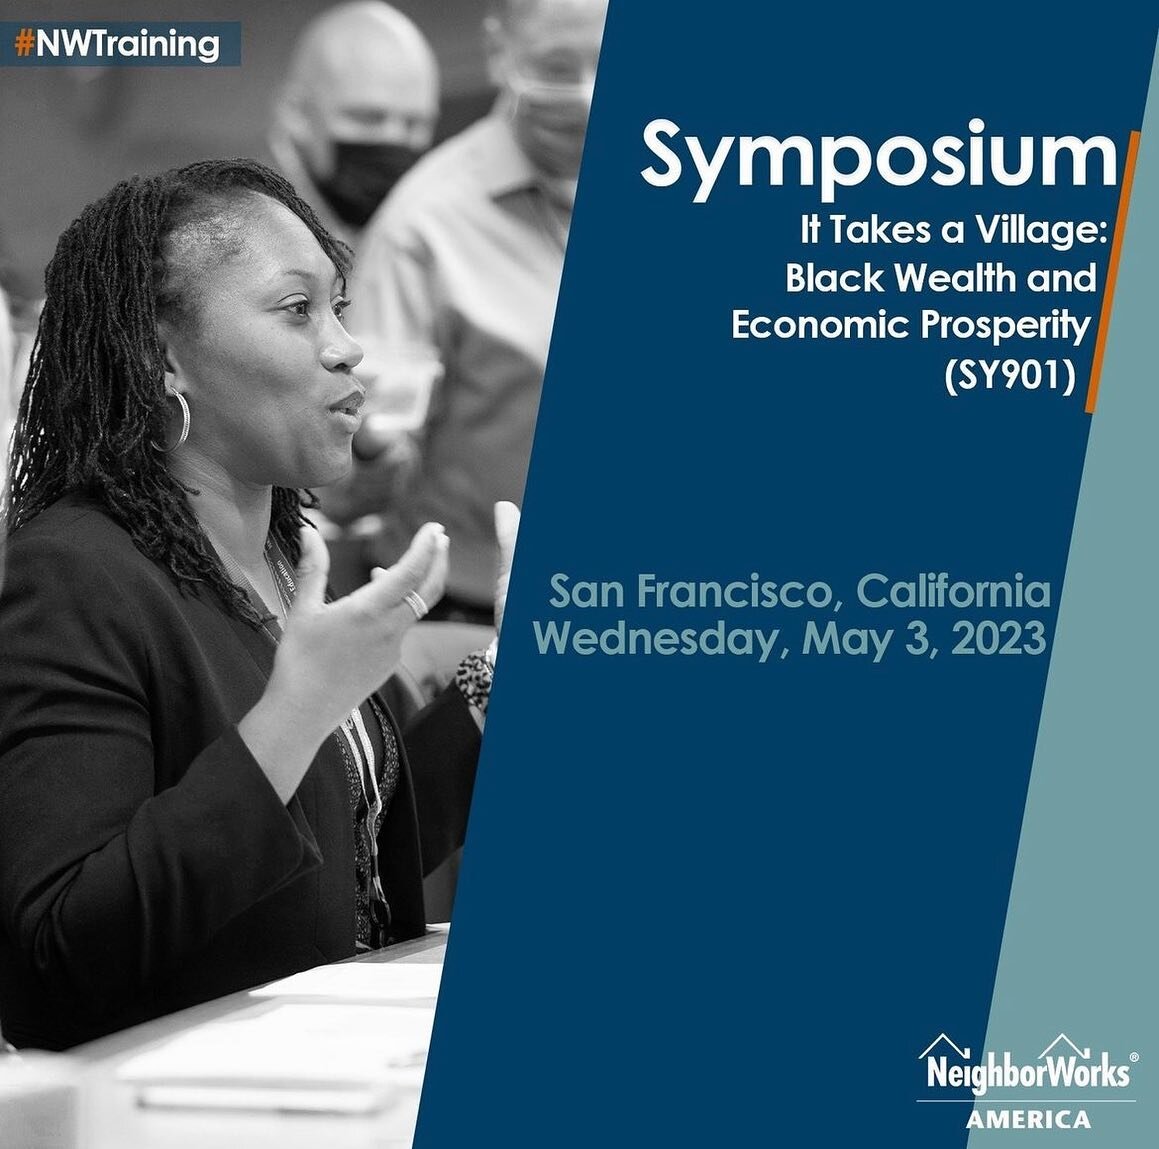 Manna, Inc was proud to participate in @neighborworks one-day symposium and panel on building wealth in Black households and communities, an issue they are exploring as part of the &ldquo;Advancing Equity for People of Color&rdquo; series this year. 